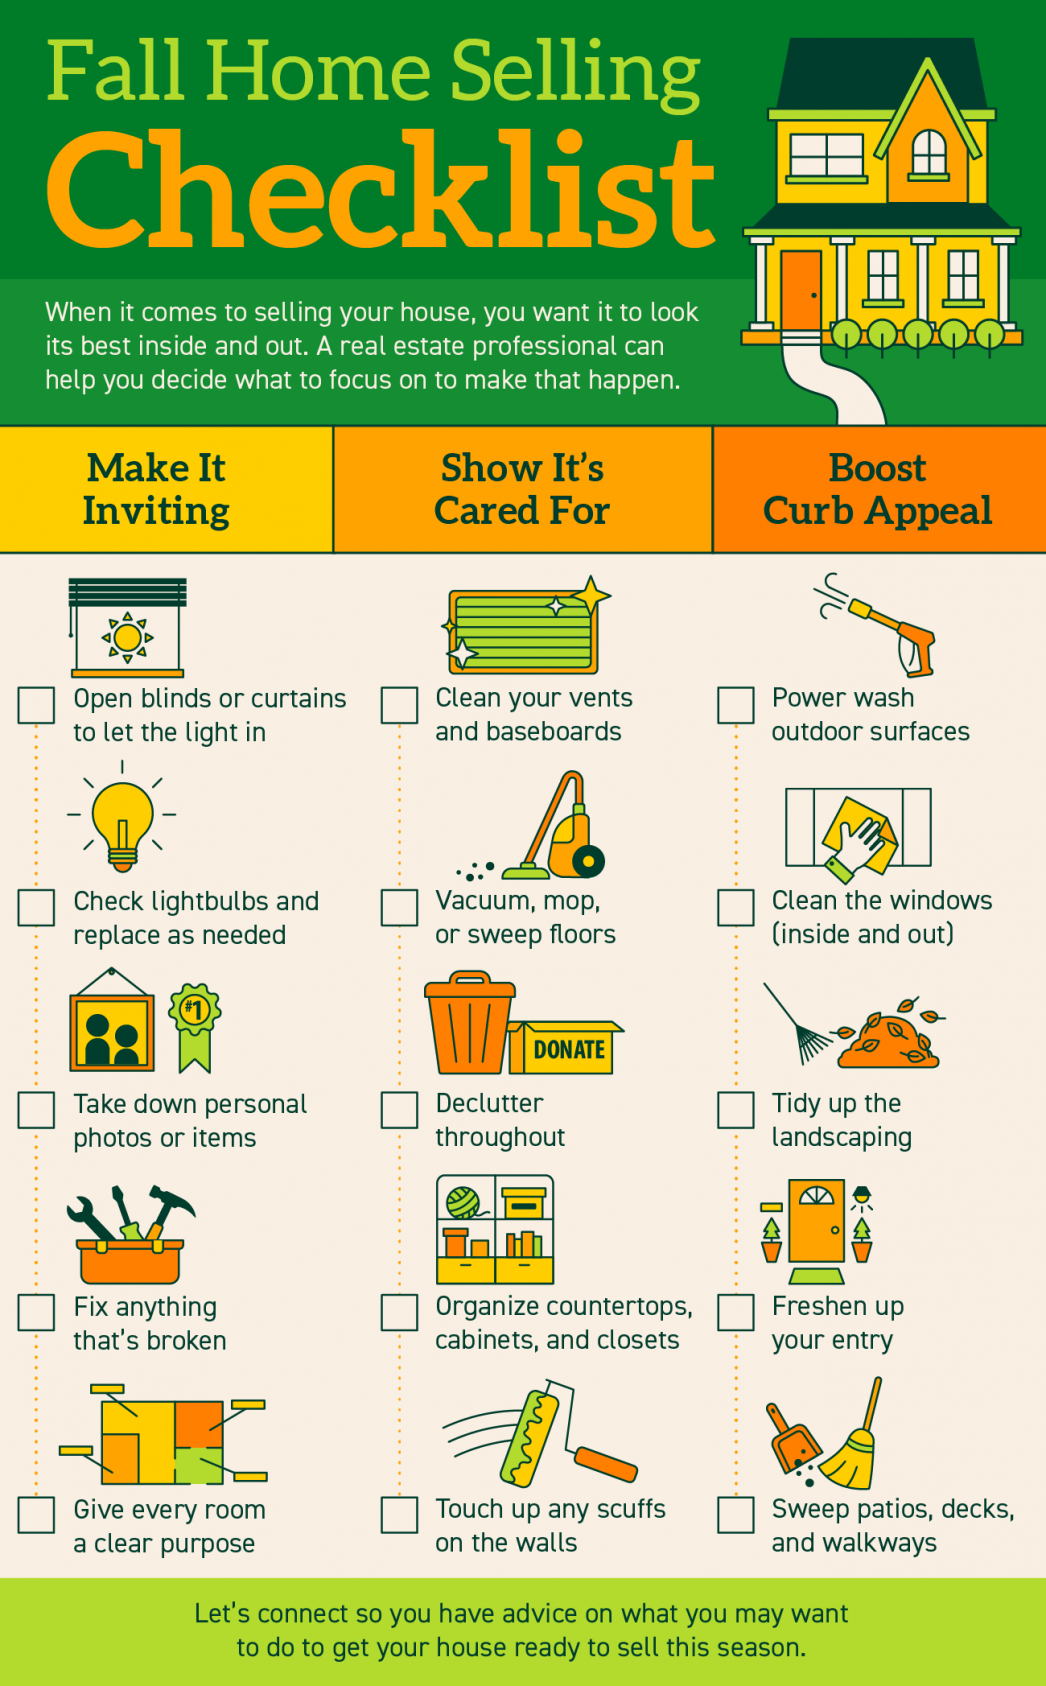 Fall Home Selling Checklist [INFOGRAPHIC] | MyKCM